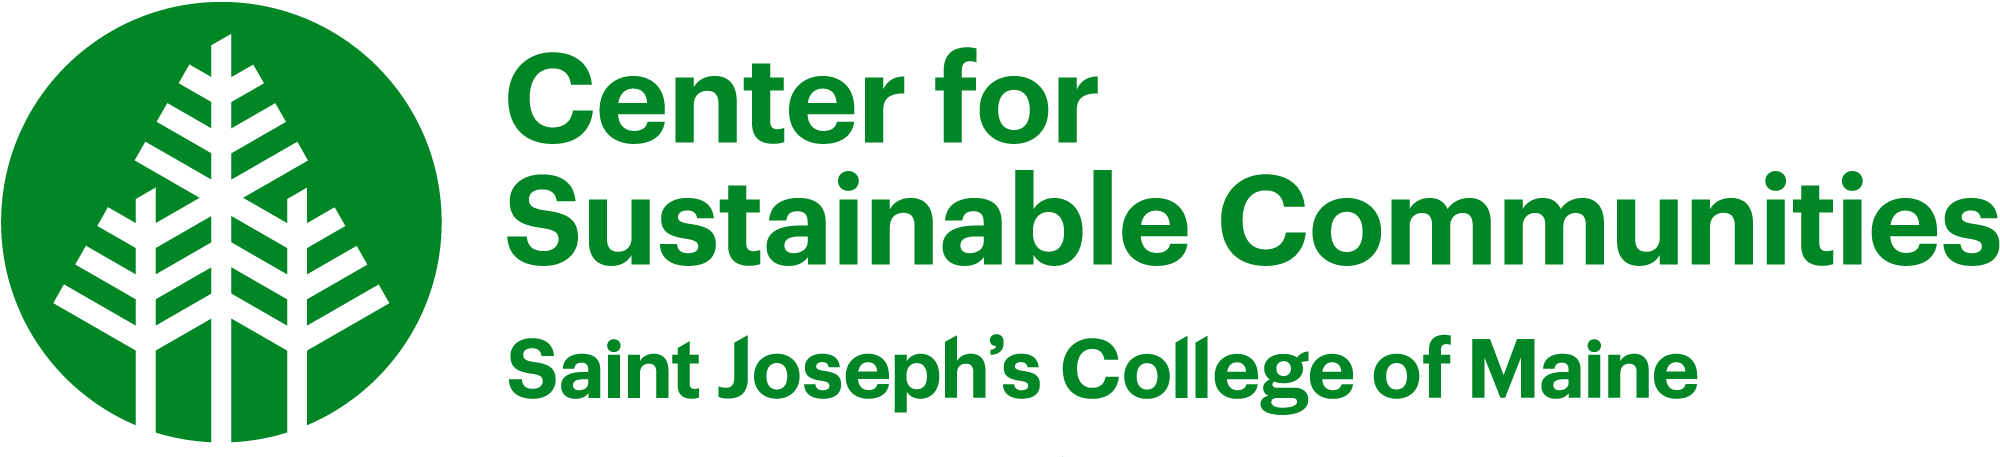 Center for Sustainable Communities